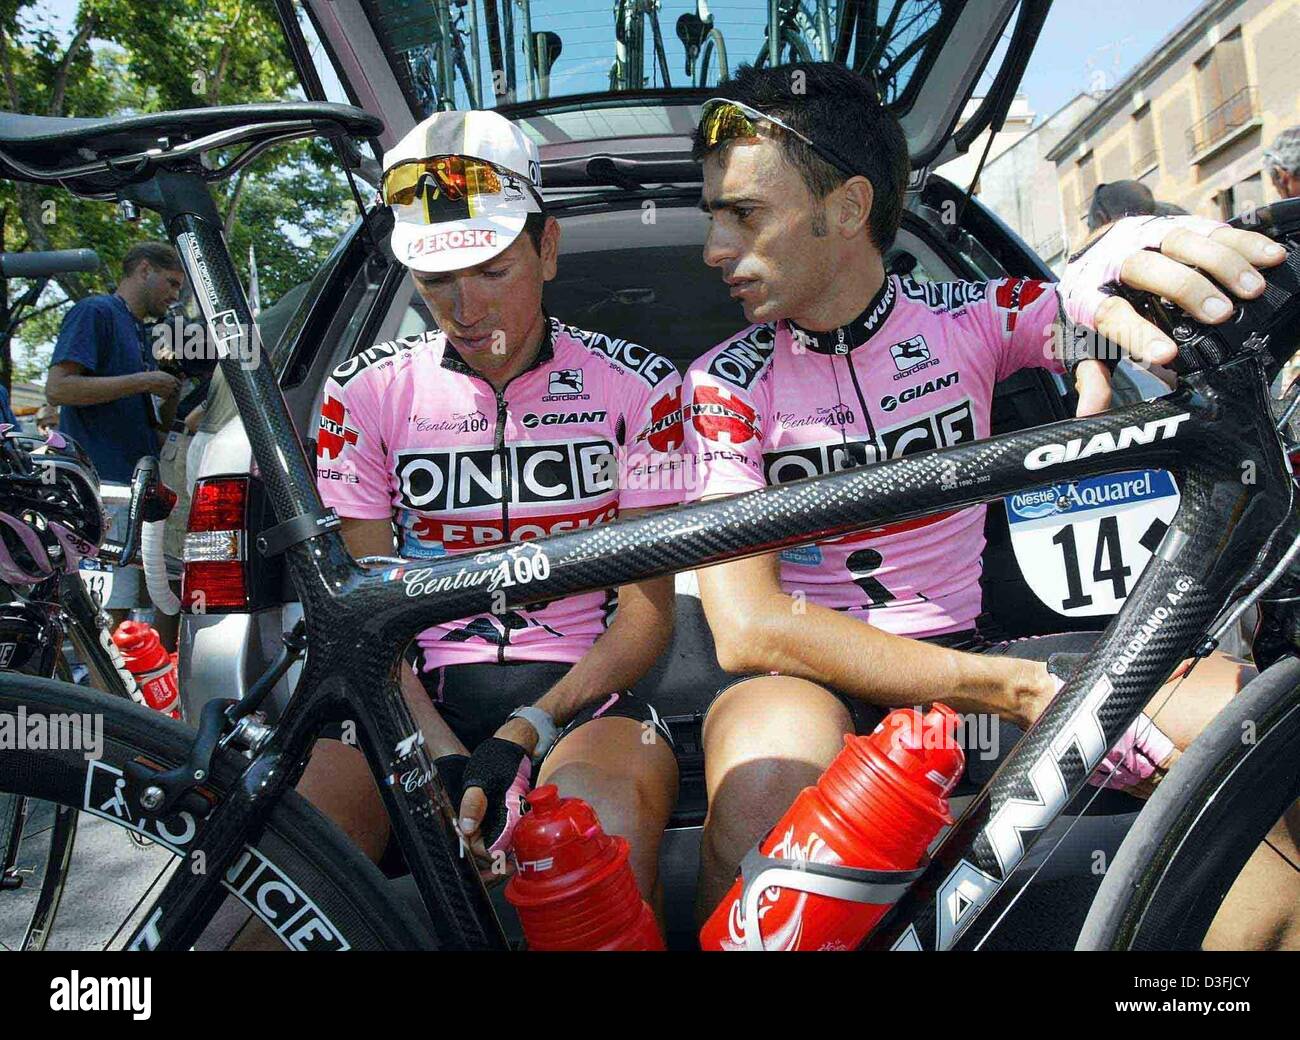 (dpa) - Spanish cyclist Alvaro Gonzalez de Galdeano (R) and Portoguese cyclist Jose Azevedo (Team Once-Eroski) sit on the back of a car and look shocked before the start  of the 10th leg of the Tour de France in Gap, France, 15 July 2003. Their team captain Joseba Beloki (Team Once-Eroski) who ranked second in the overall standings had a severe accident in which he contracted a bro Stock Photo